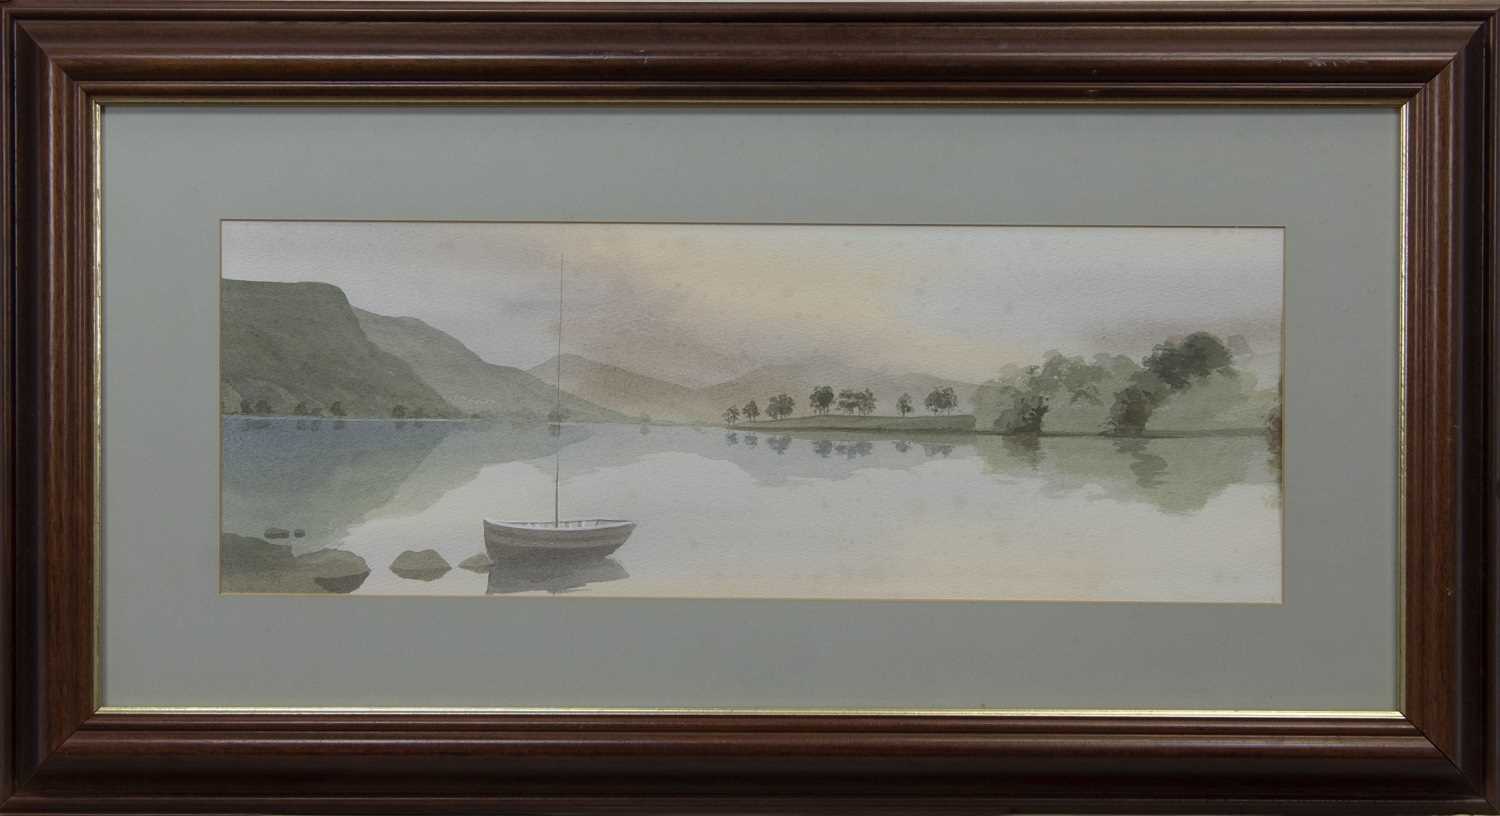 Lot 67 - BOAT AT THE LOCH, A SCOTTISH WATERCOLOUR